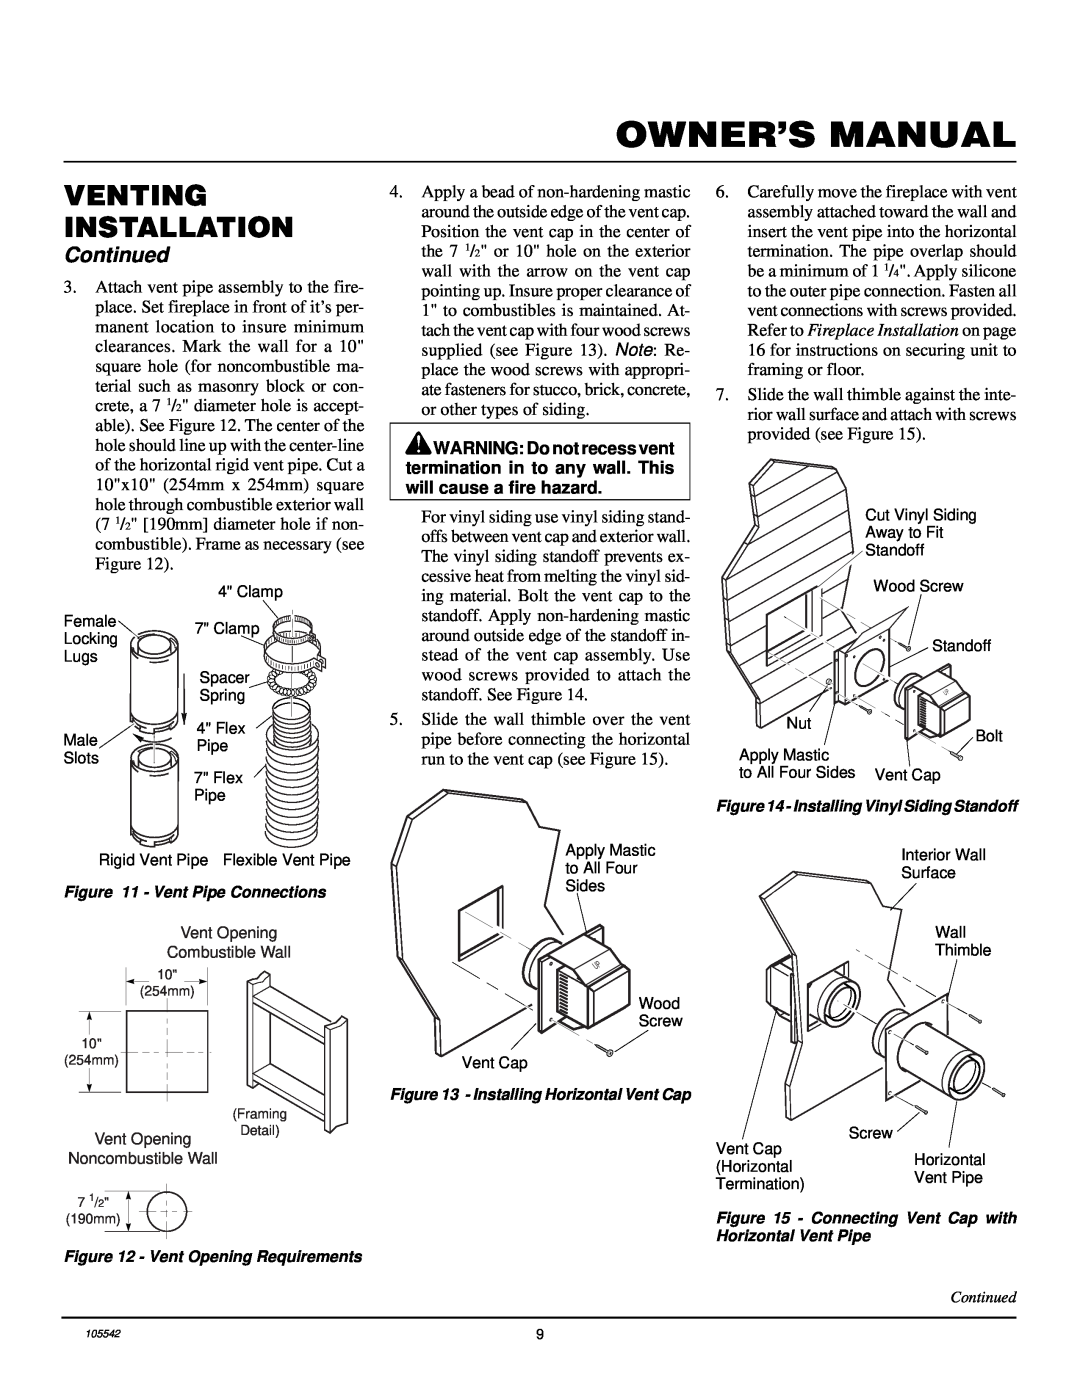 Desa CHDV41N/P Owner’S Manual, Venting Installation, Continued, Vent Pipe Connections, Installing Horizontal Vent Cap 